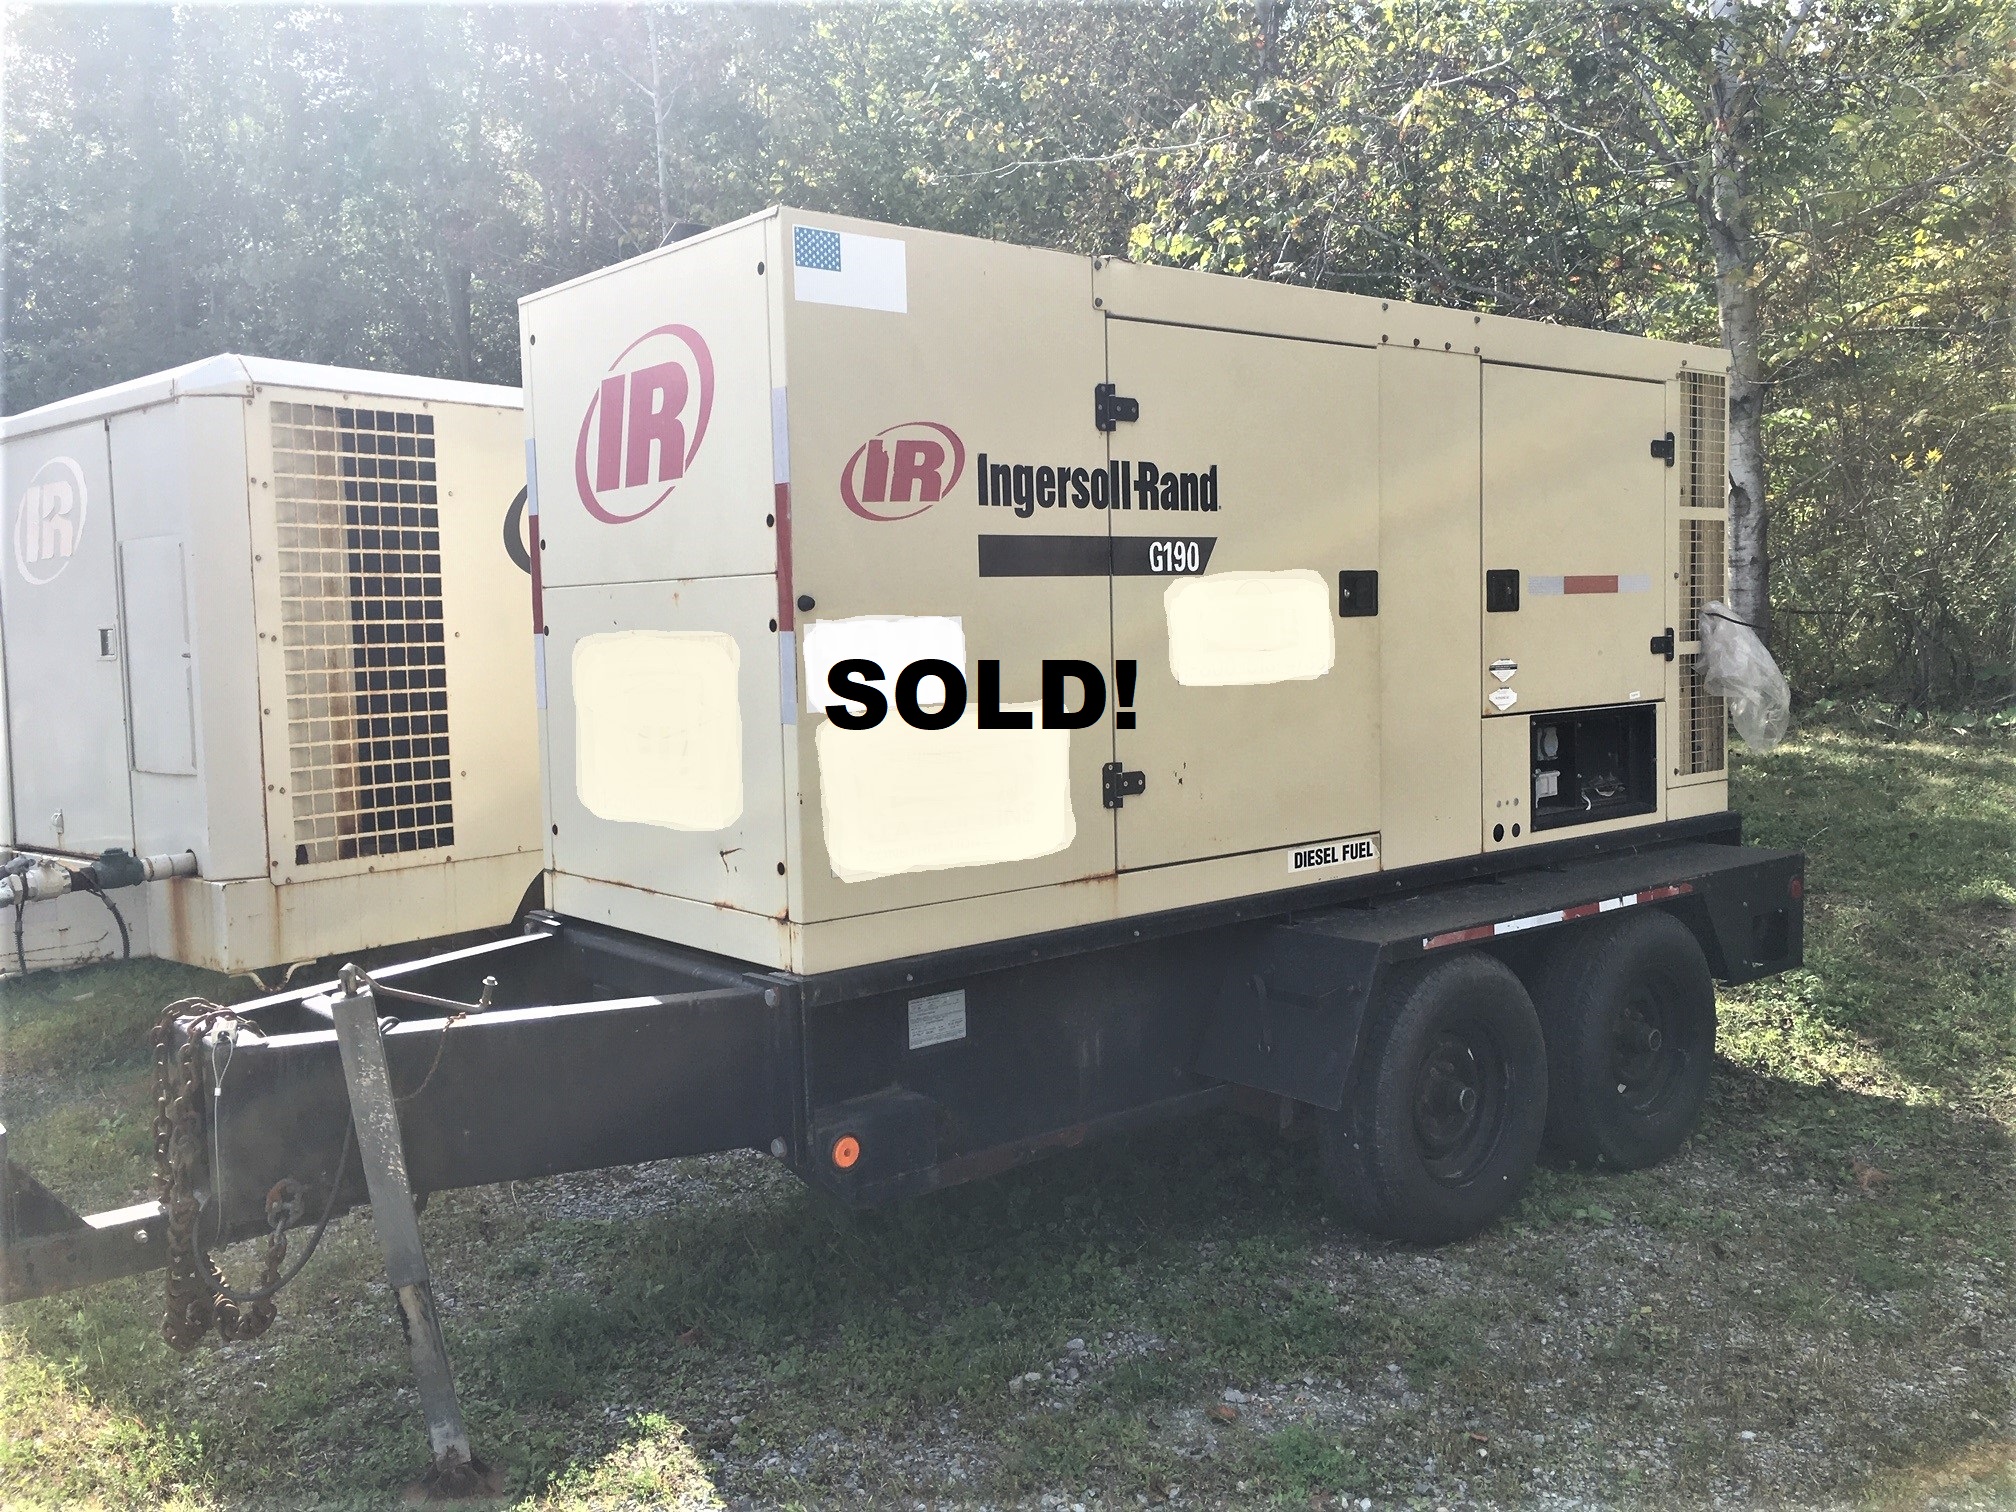 2006 Gen Set Ingersoll Rand G 190 model. Portable commercial generator with 13'902 hours on a John Deere 6.8 liter diesel engine. The generator will produce 187 kw at 1800 rpm's. It has electric breaks,  good tires and a GVW of 9826 lbs. Generator dimensions are: Length is 16' feet 6" inches. Width is 5' feet 10" inches. Height is 7' feet 6" inches.